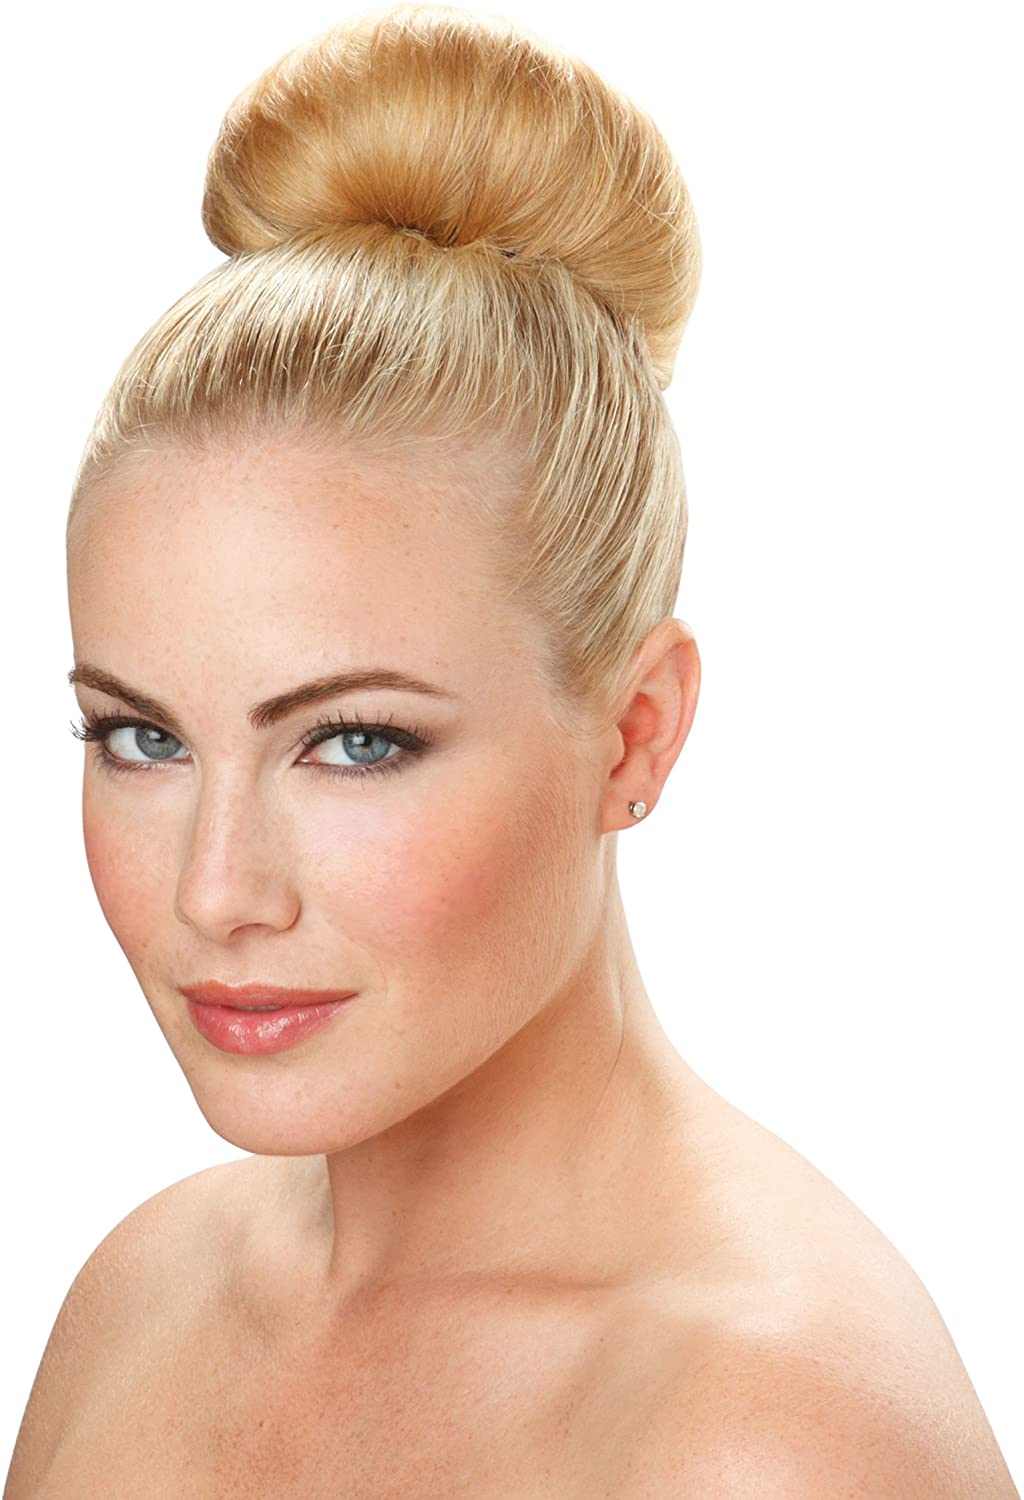 Hot Buns Simple Styling Solution For Light Color Hair Just Roll, Snap and Wrap - e4cents